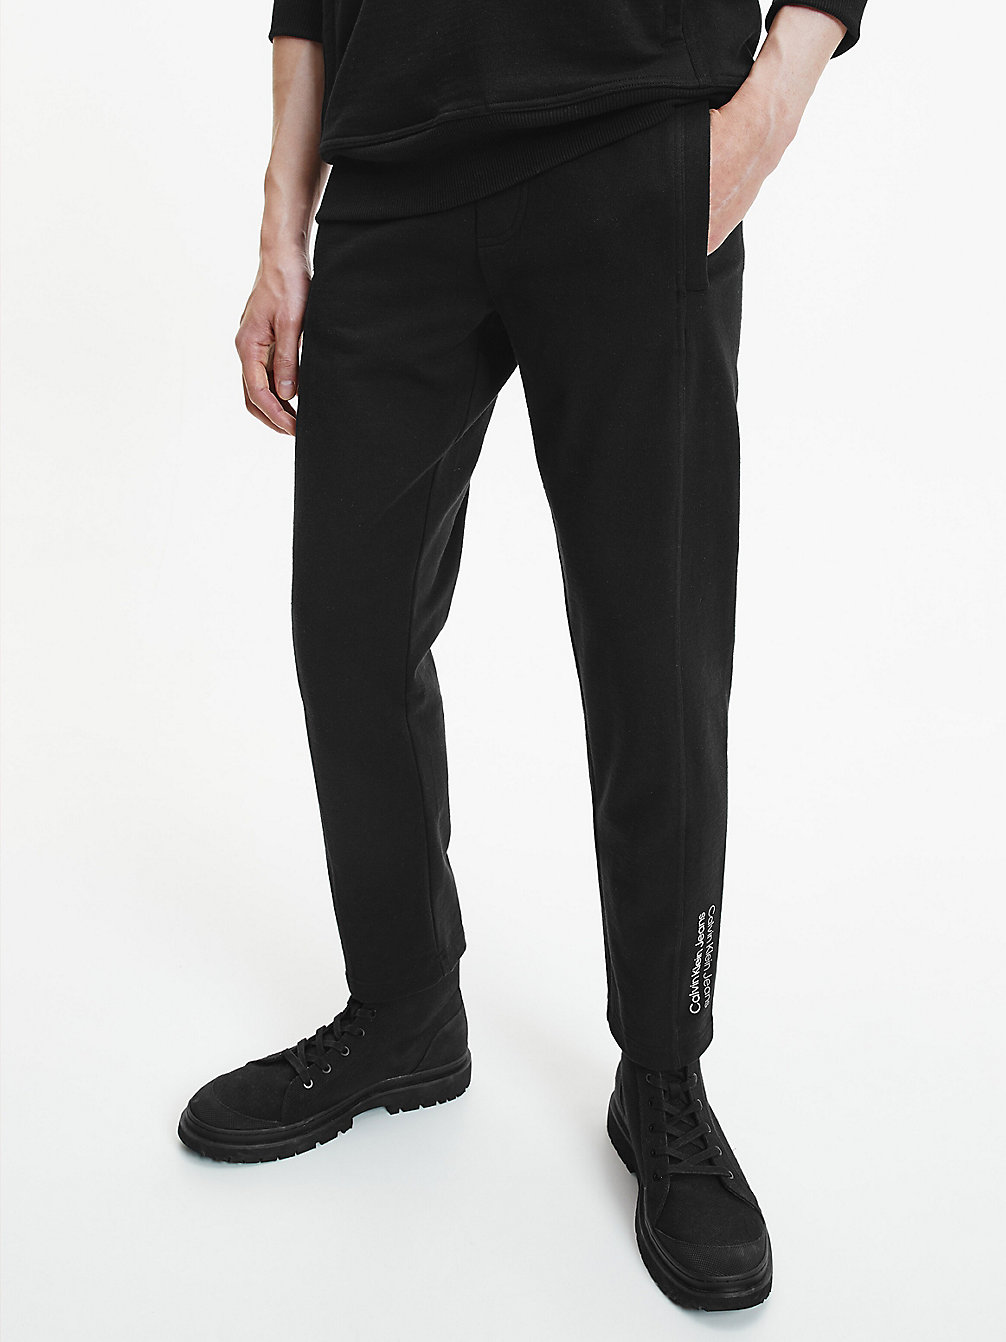 CK BLACK Recycled Cotton Straight Joggers undefined men Calvin Klein